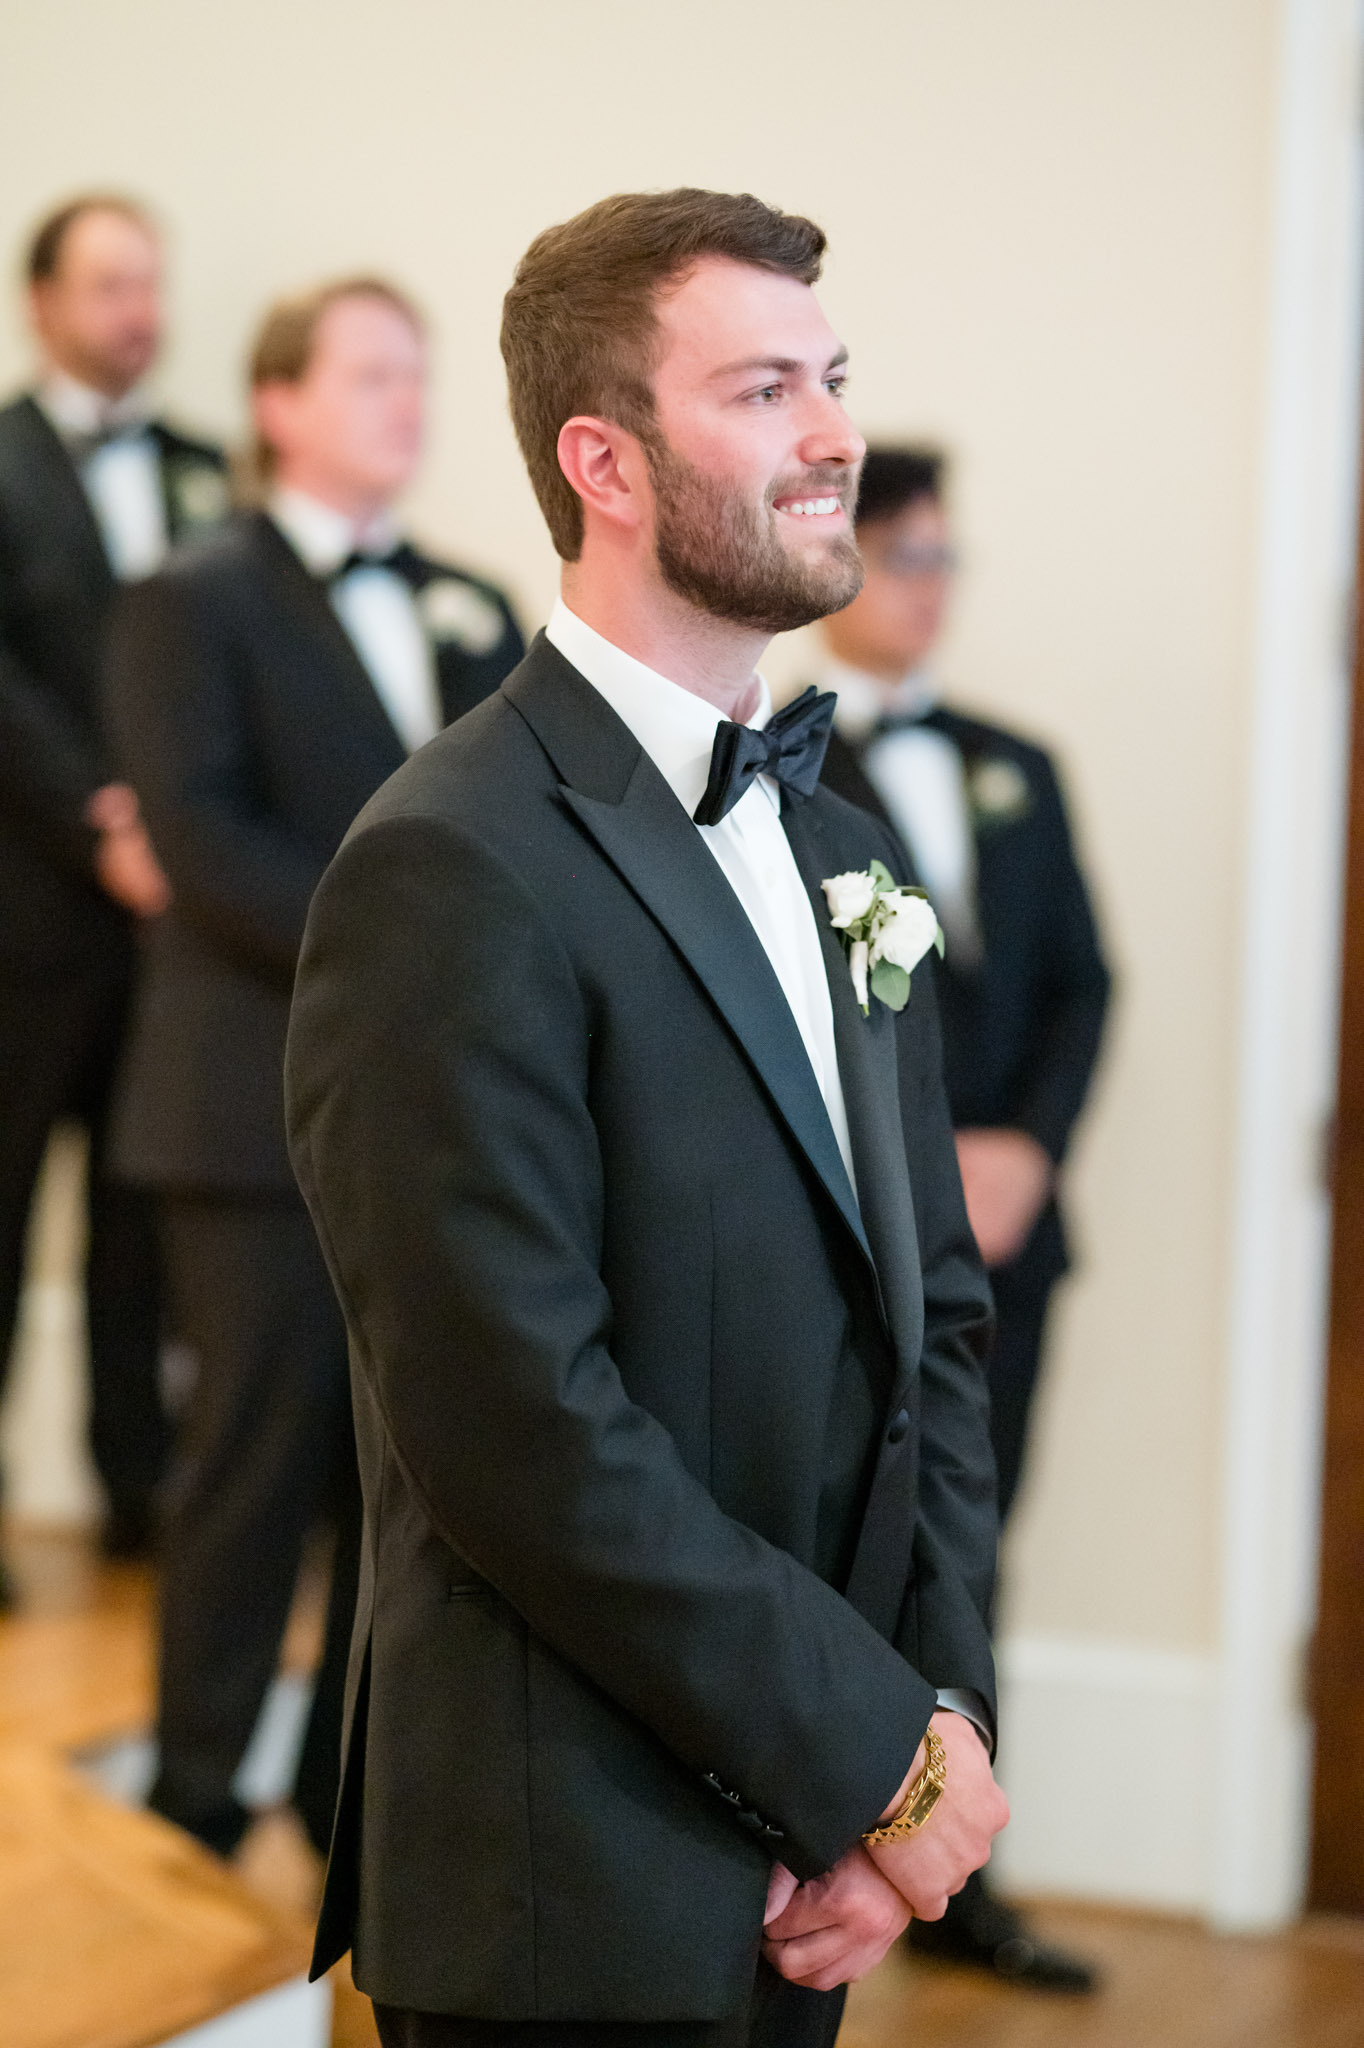 Groom smiles at bride as she comes down aisle.